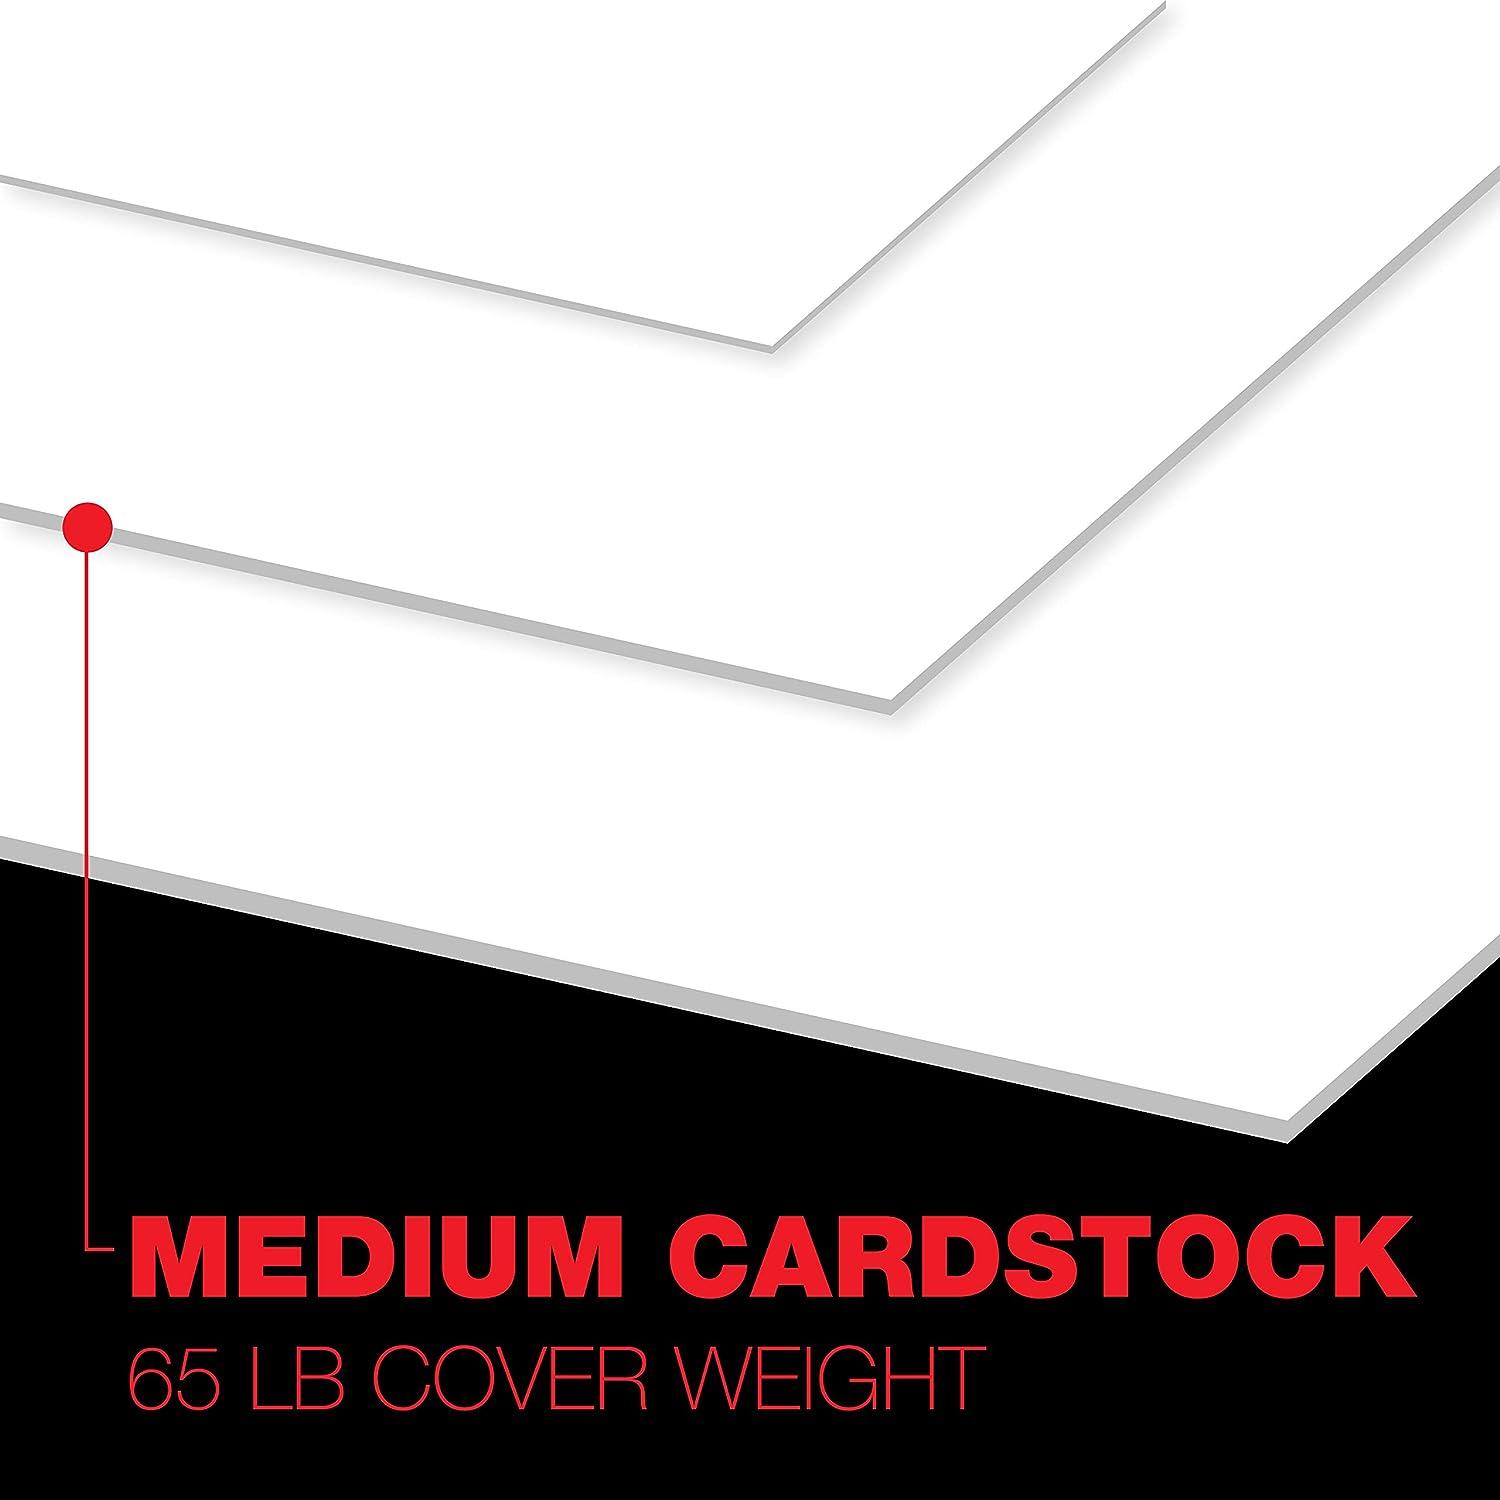 Heavy Weight White Cardstock - 100lb Extra Thick Card Stock Paper - Great  for Brochures, Invitations, Business Cards, Stationary Printing | Acid-free